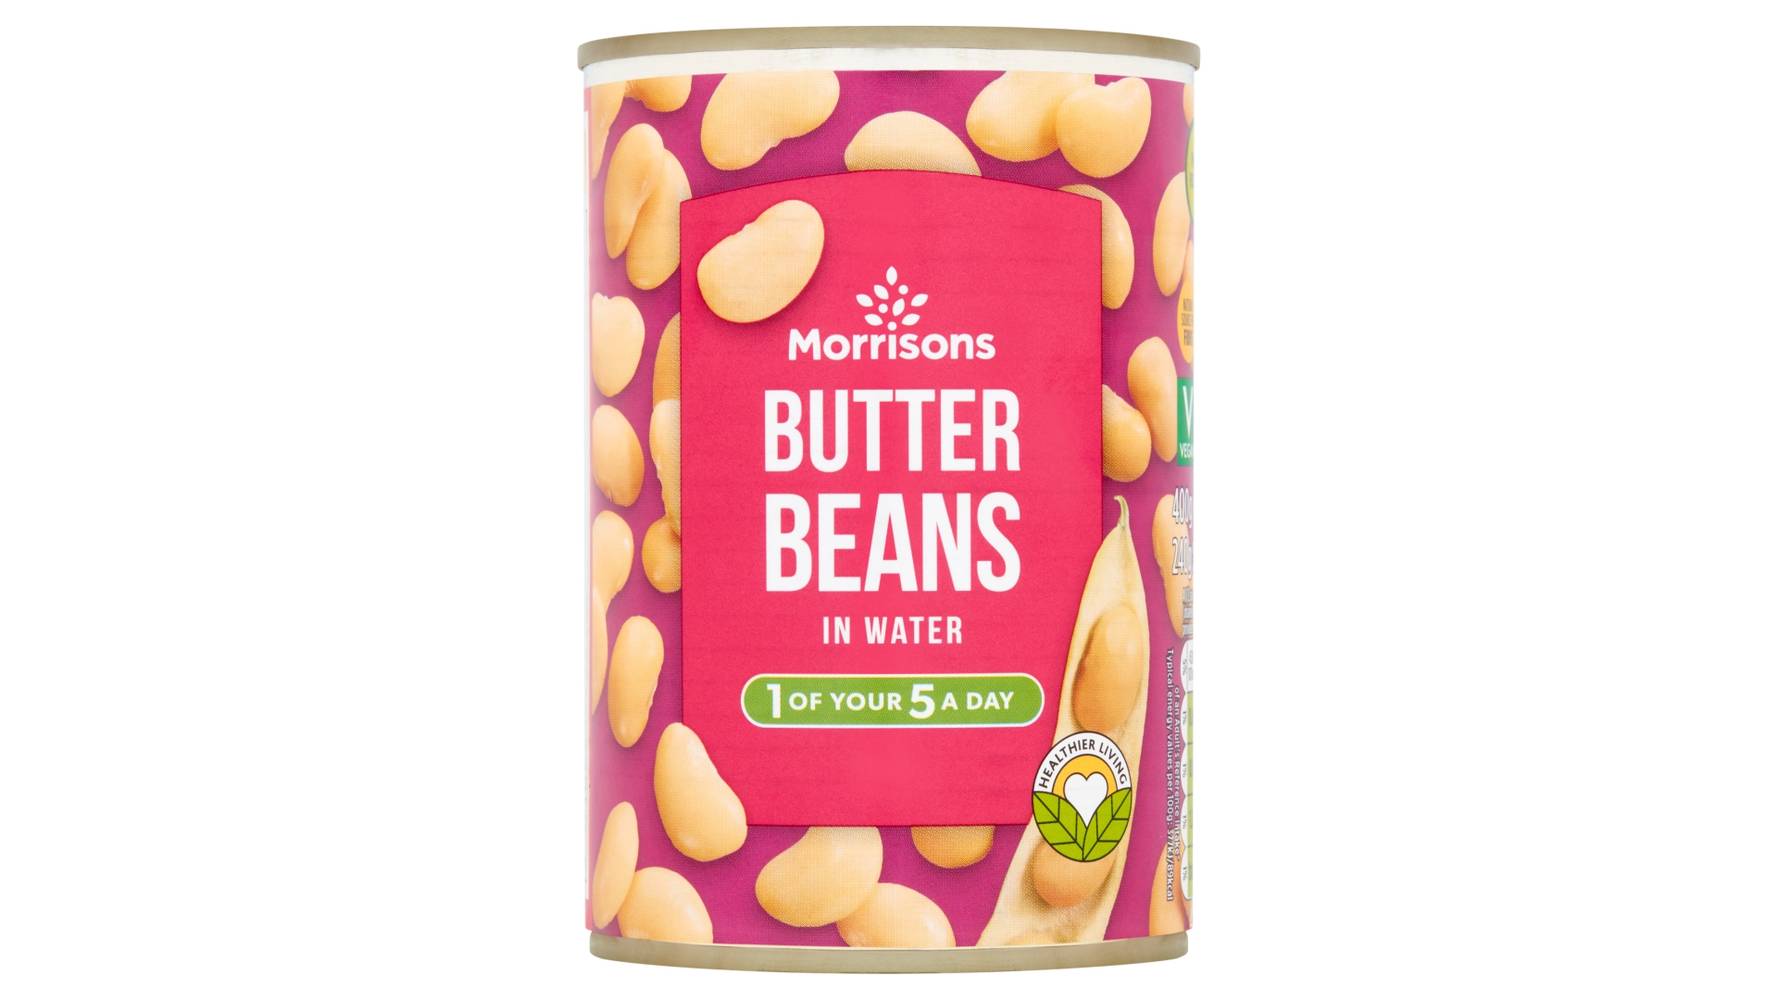 Morrisons Butter Beans in Water 400g